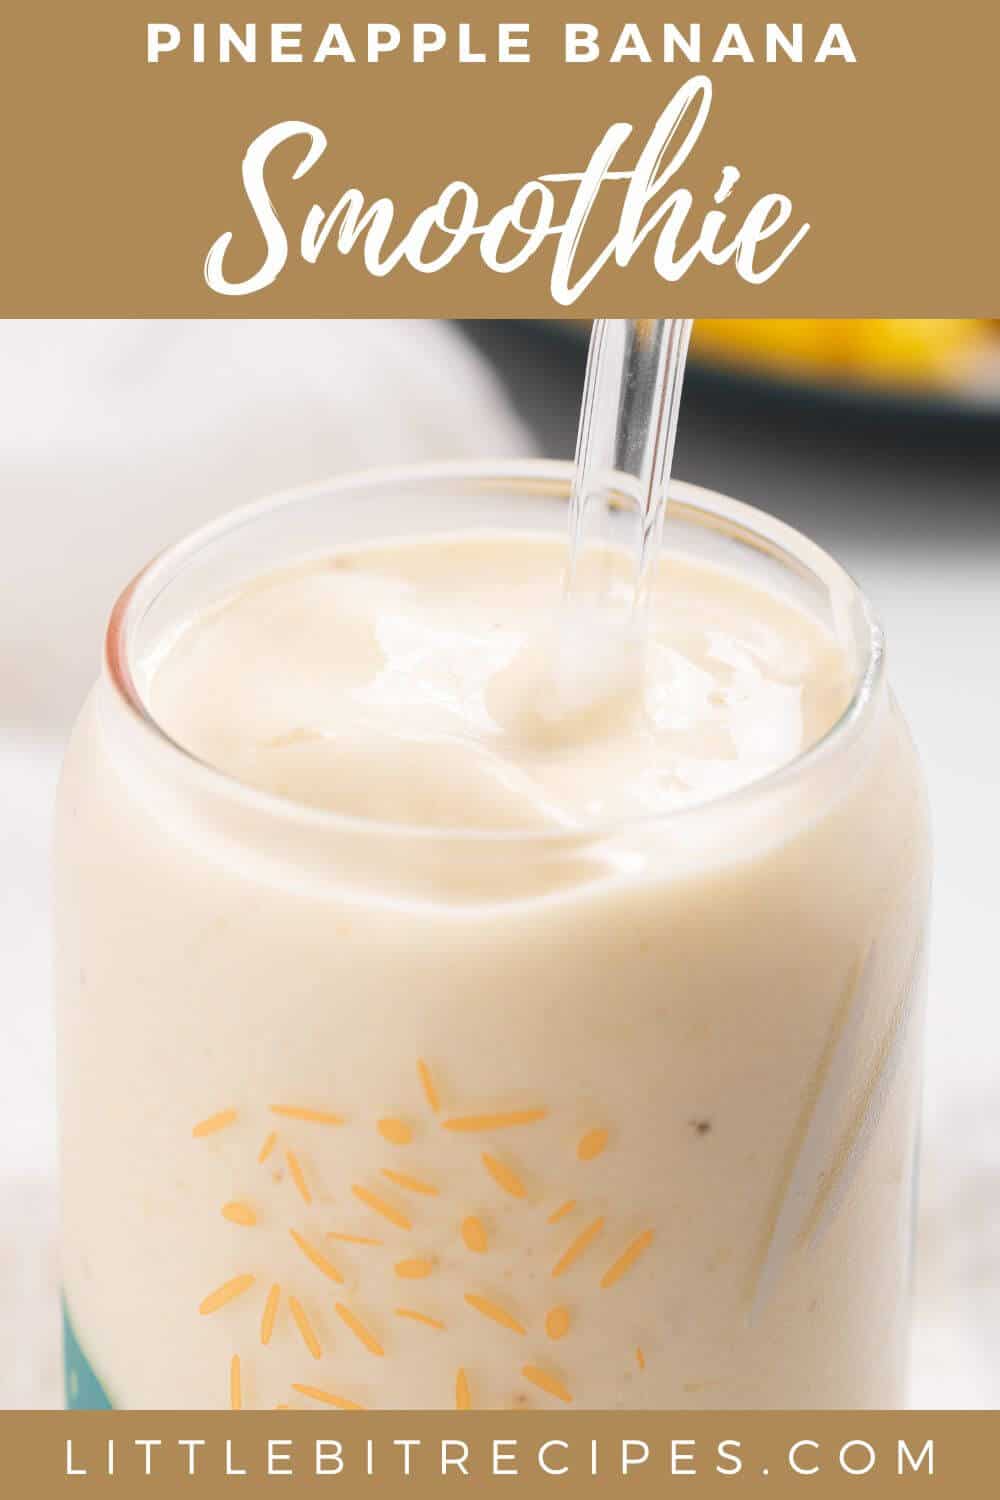 pineapple banana smoothie with text.